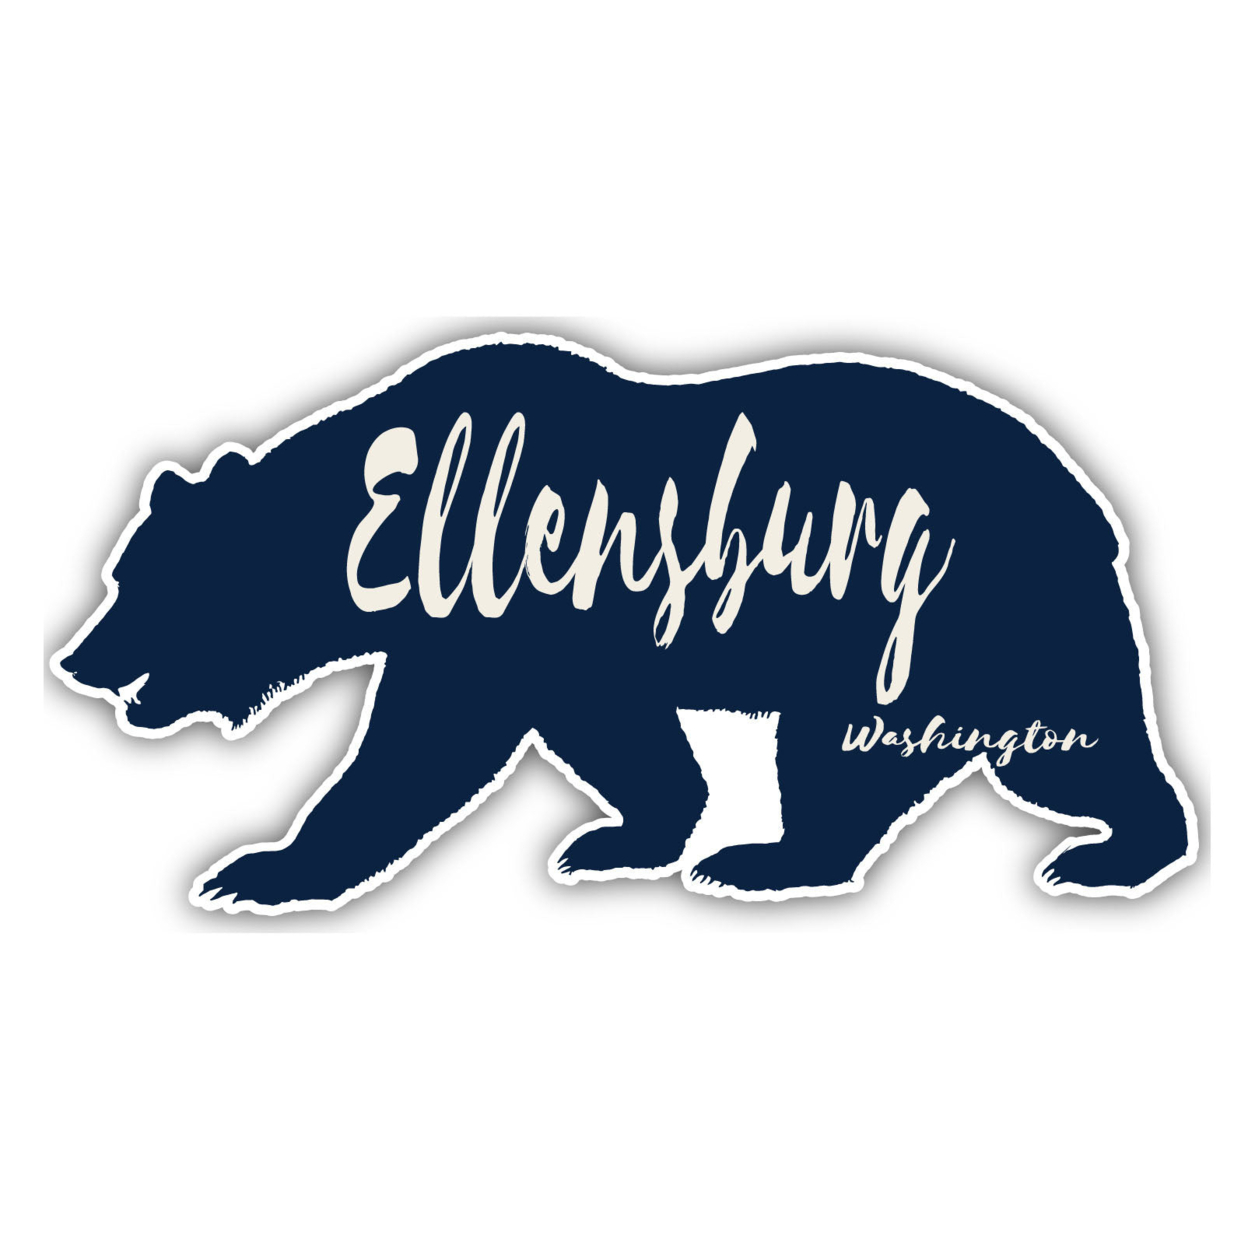 Ellensburg Washington Souvenir Decorative Stickers (Choose Theme And Size) - 4-Pack, 2-Inch, Great Outdoors